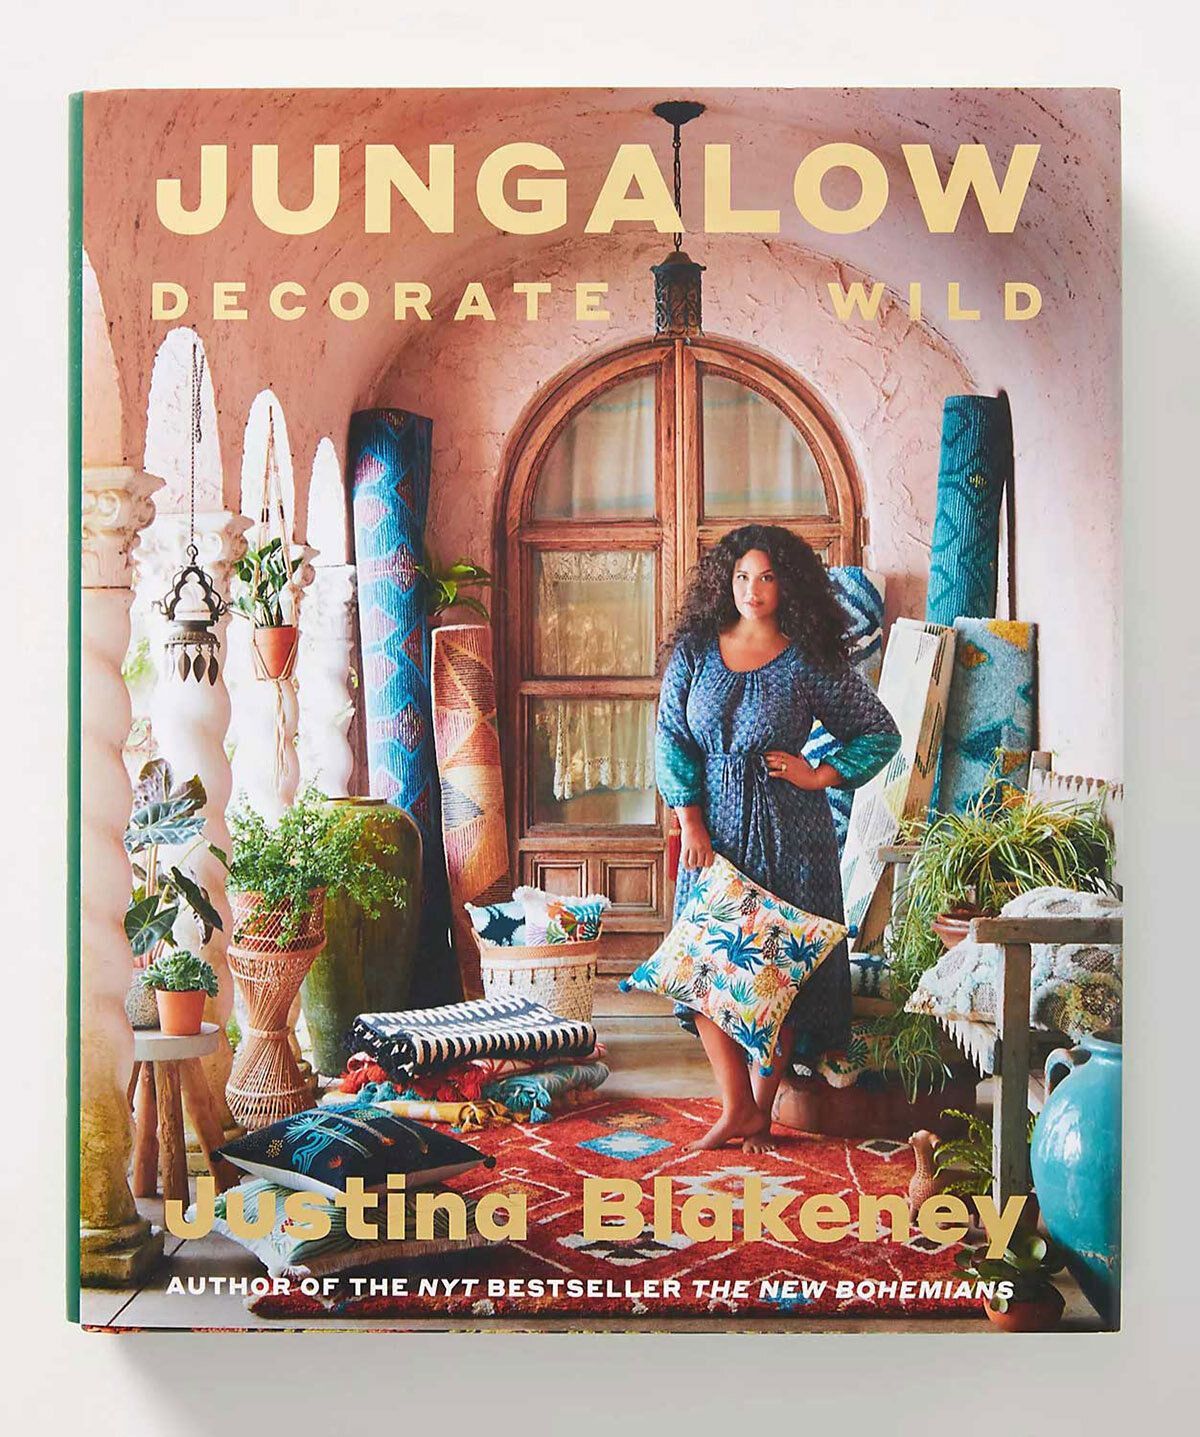 Dabito has been the interior stylist for all three books with Justina Blakeney